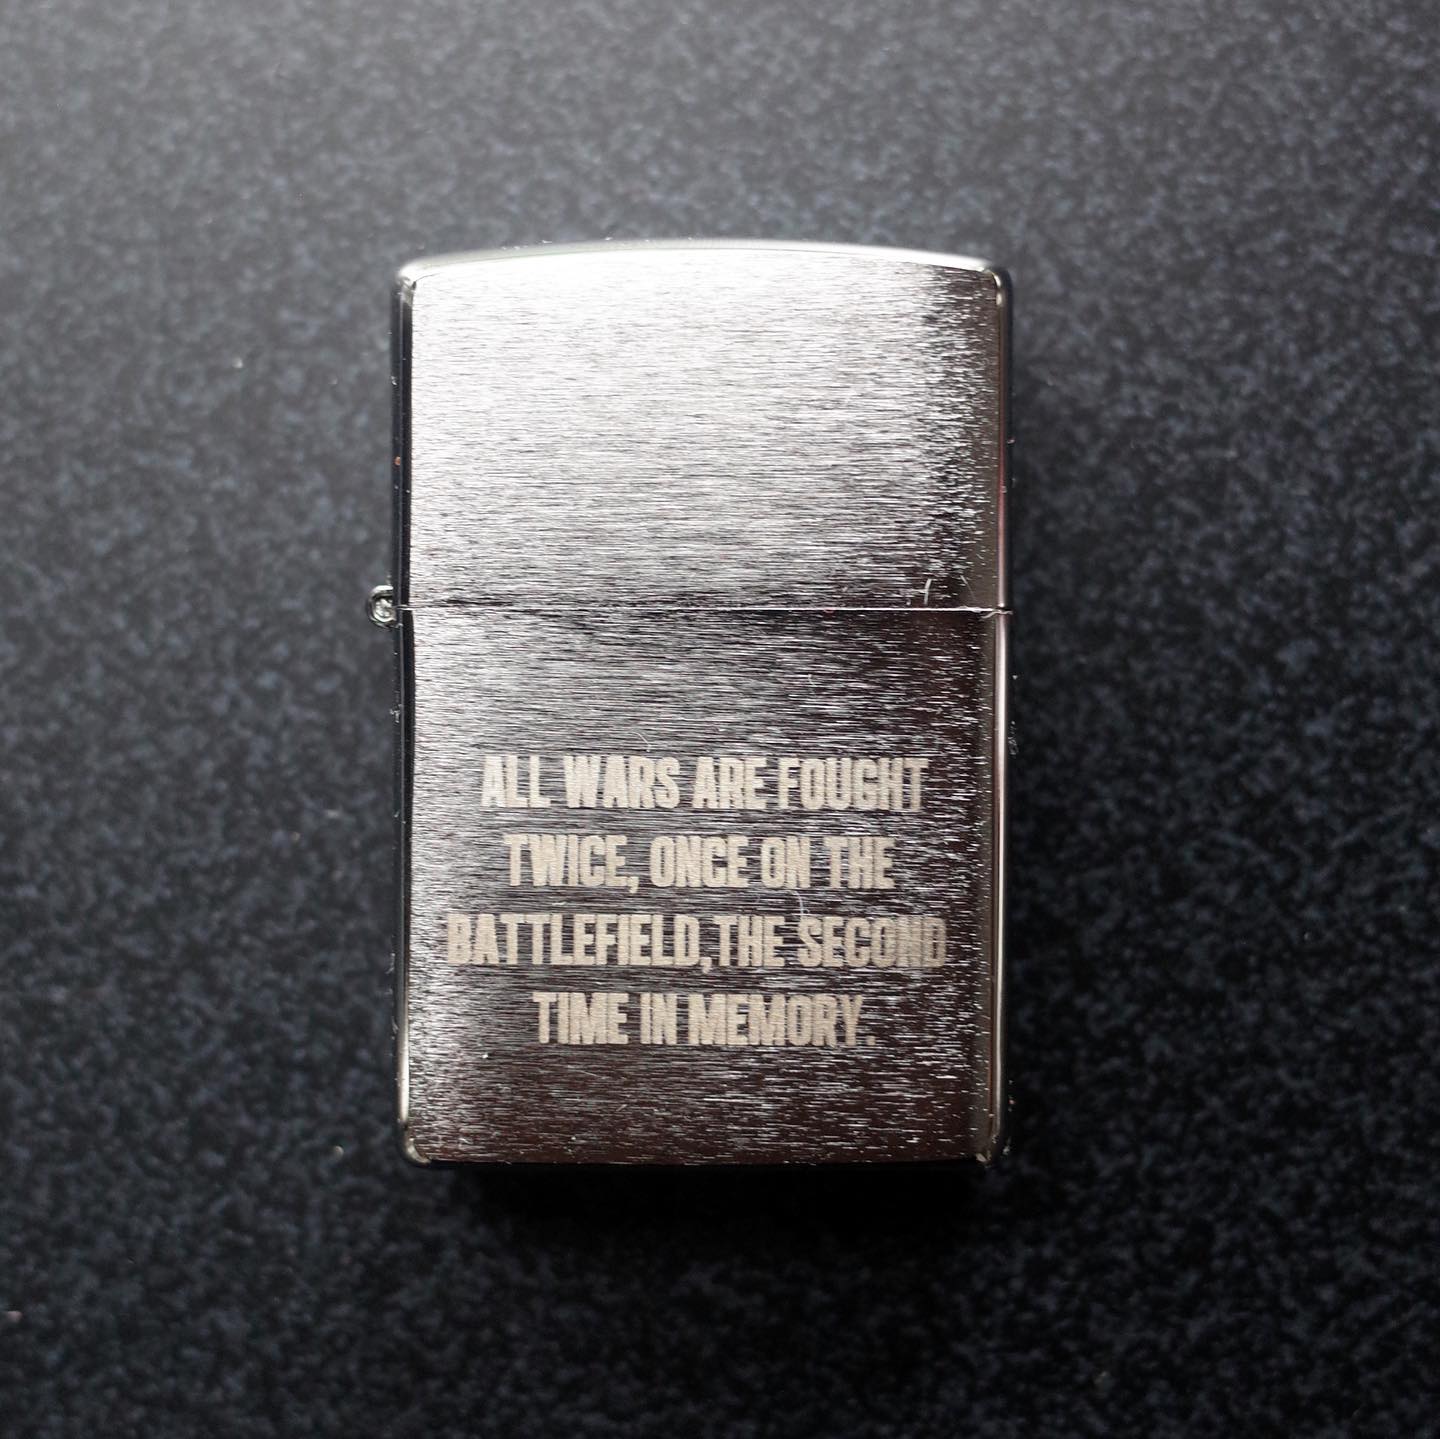 Zippo style lighter with the engraving "ALL WARS ARE FOUGHT TWICE, ONCE ON THE BATTLEFIELD, THE SECOND TIME IN MEMORY."